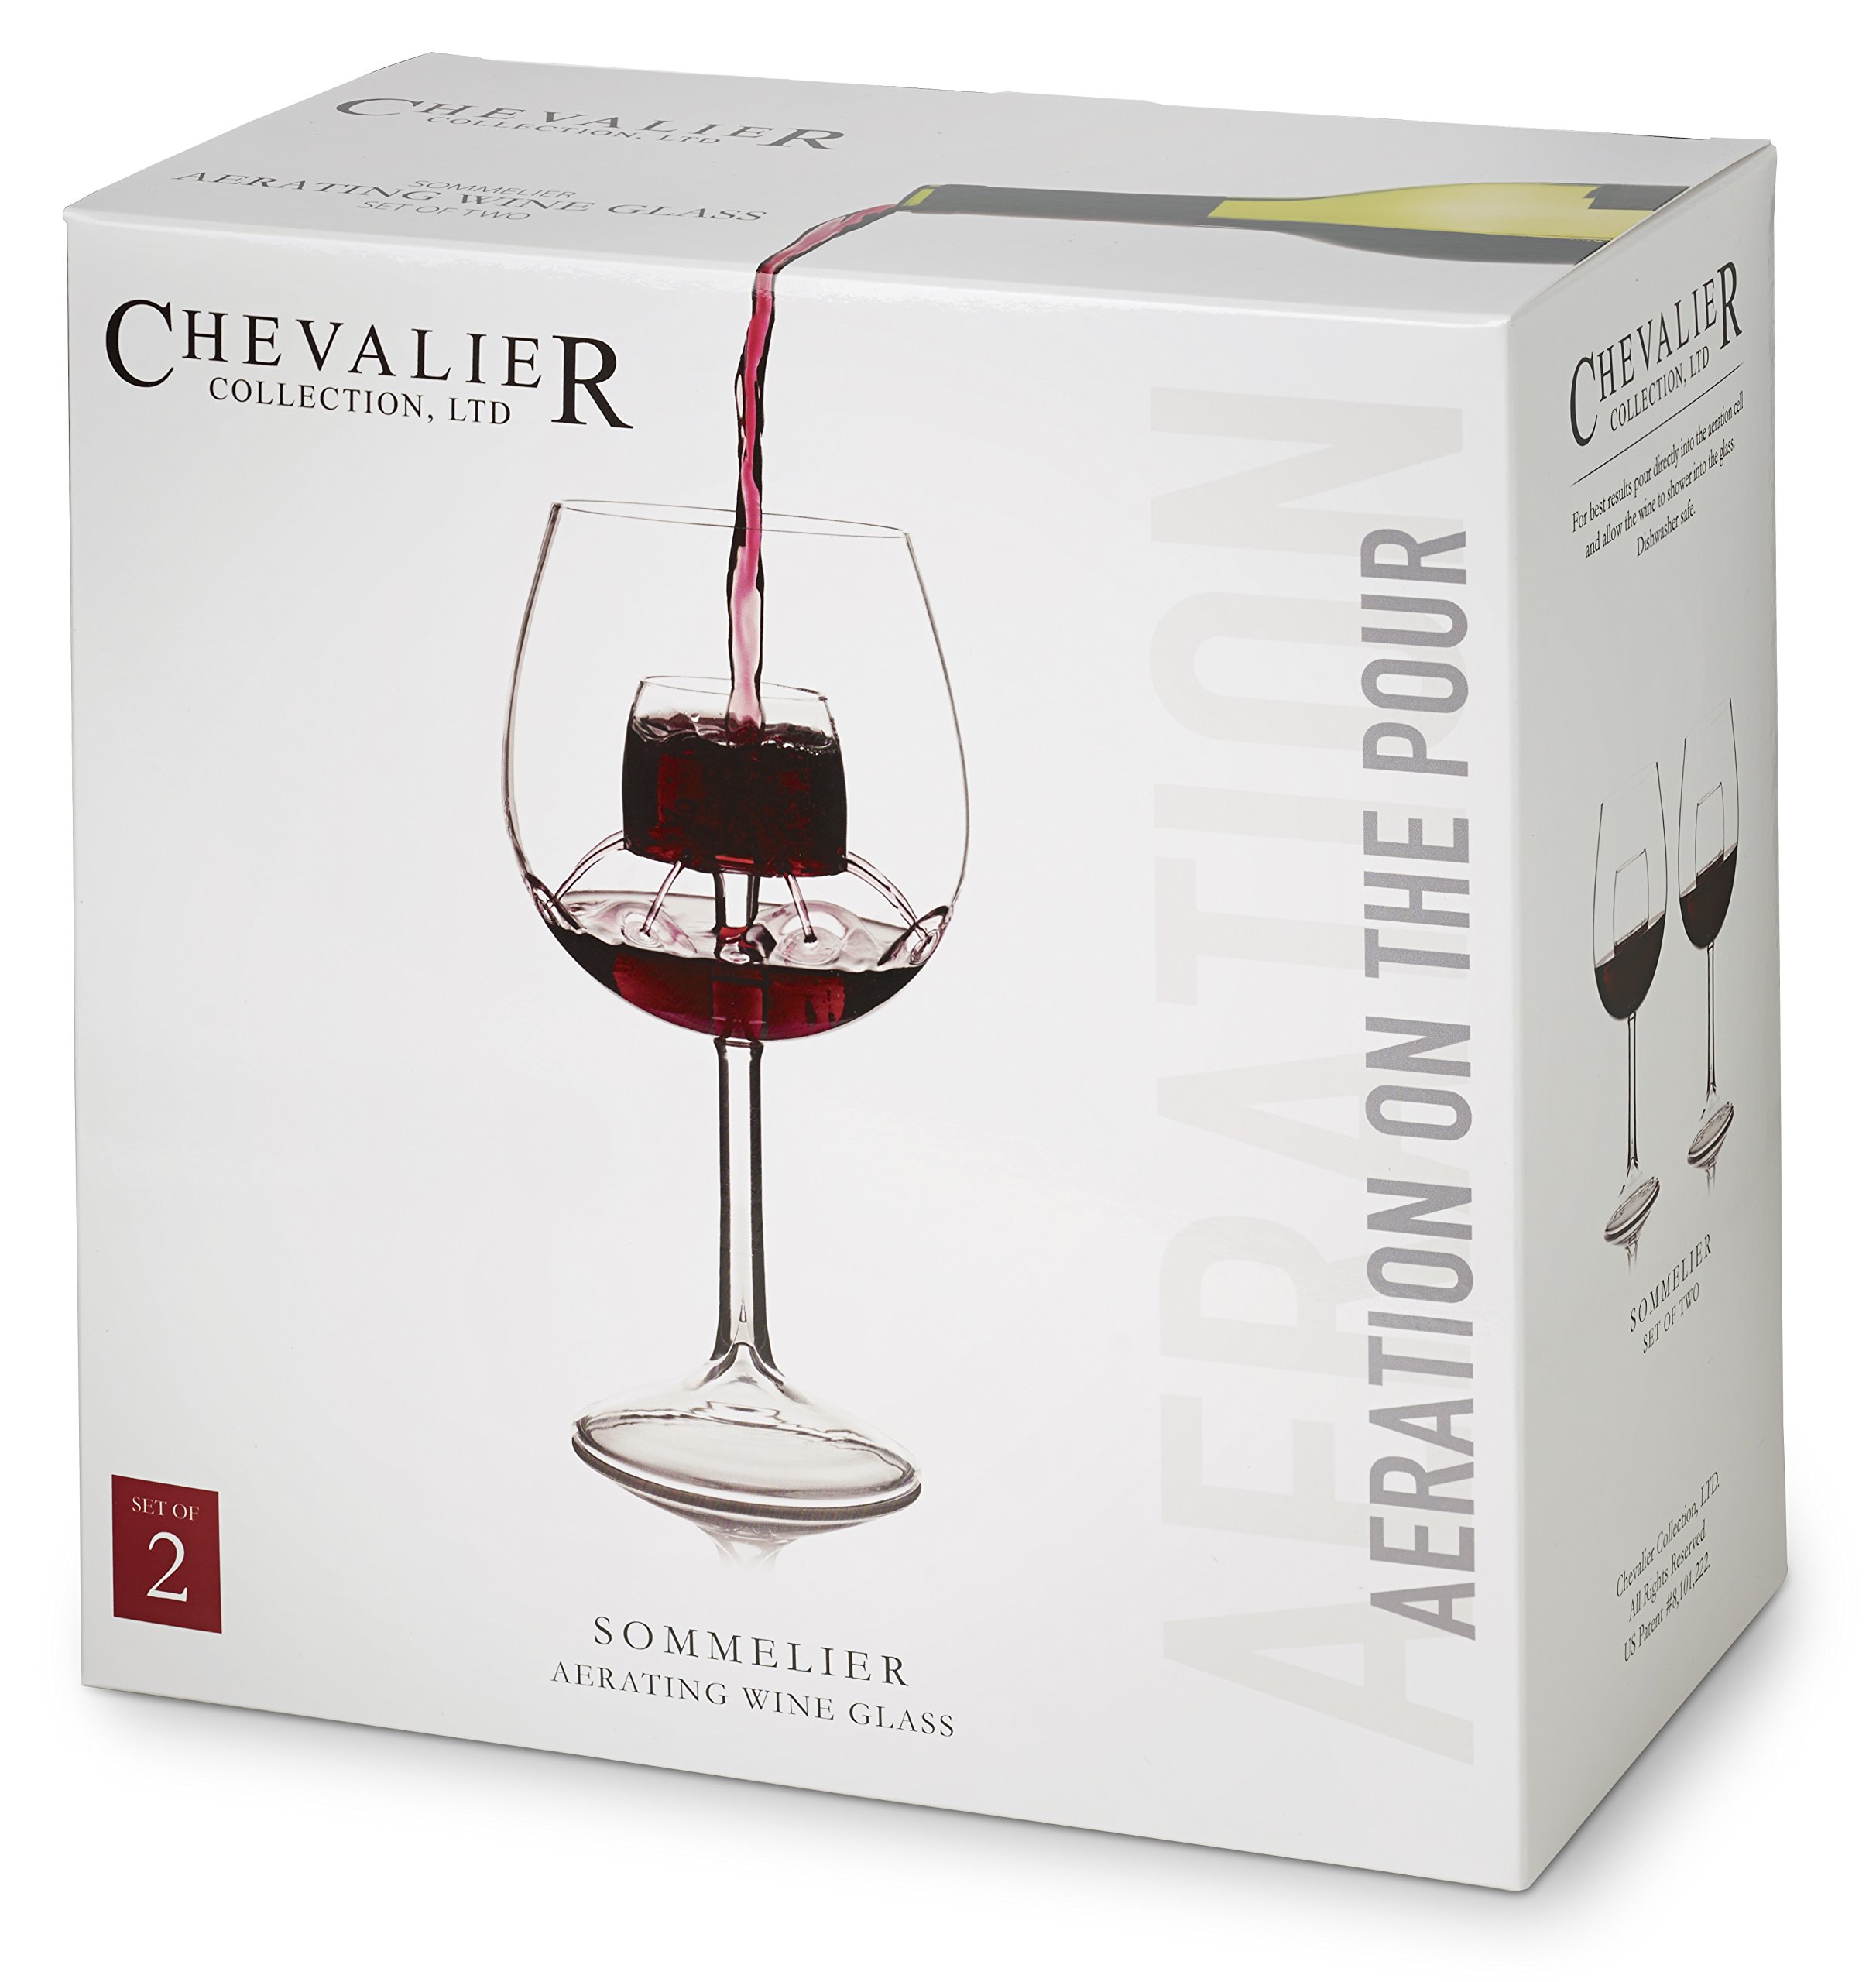 Sommelier Aerating Wine Glass (Set of 2) by Chevalier Collection – Patented Wine Glasses with Built In Aerator – Unique Gift for Wine Lovers